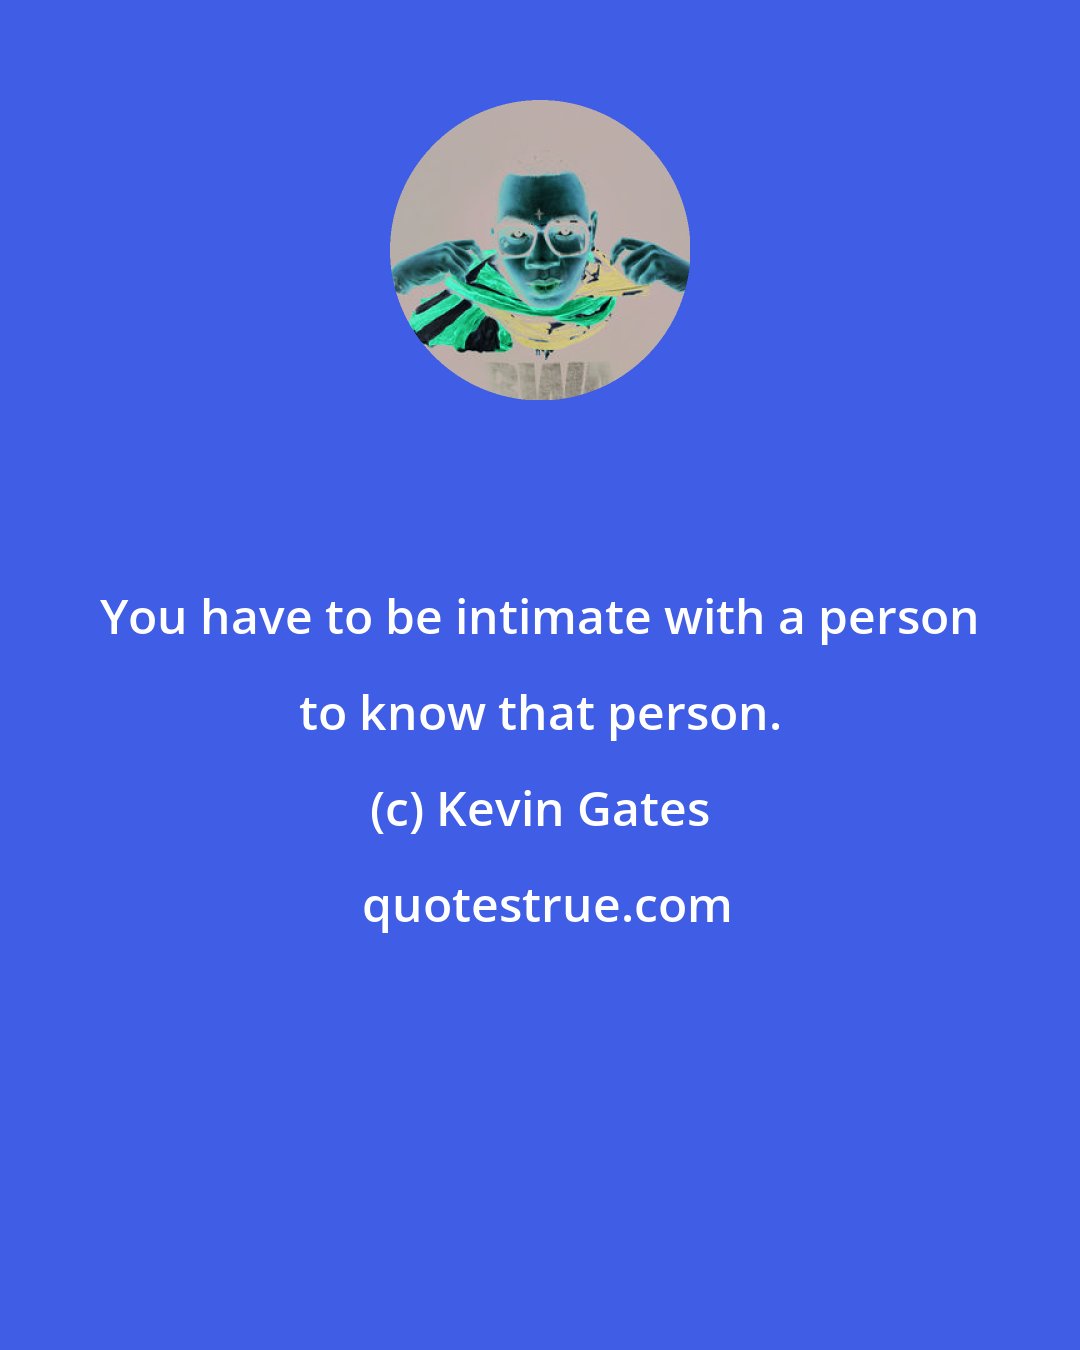 Kevin Gates: You have to be intimate with a person to know that person.